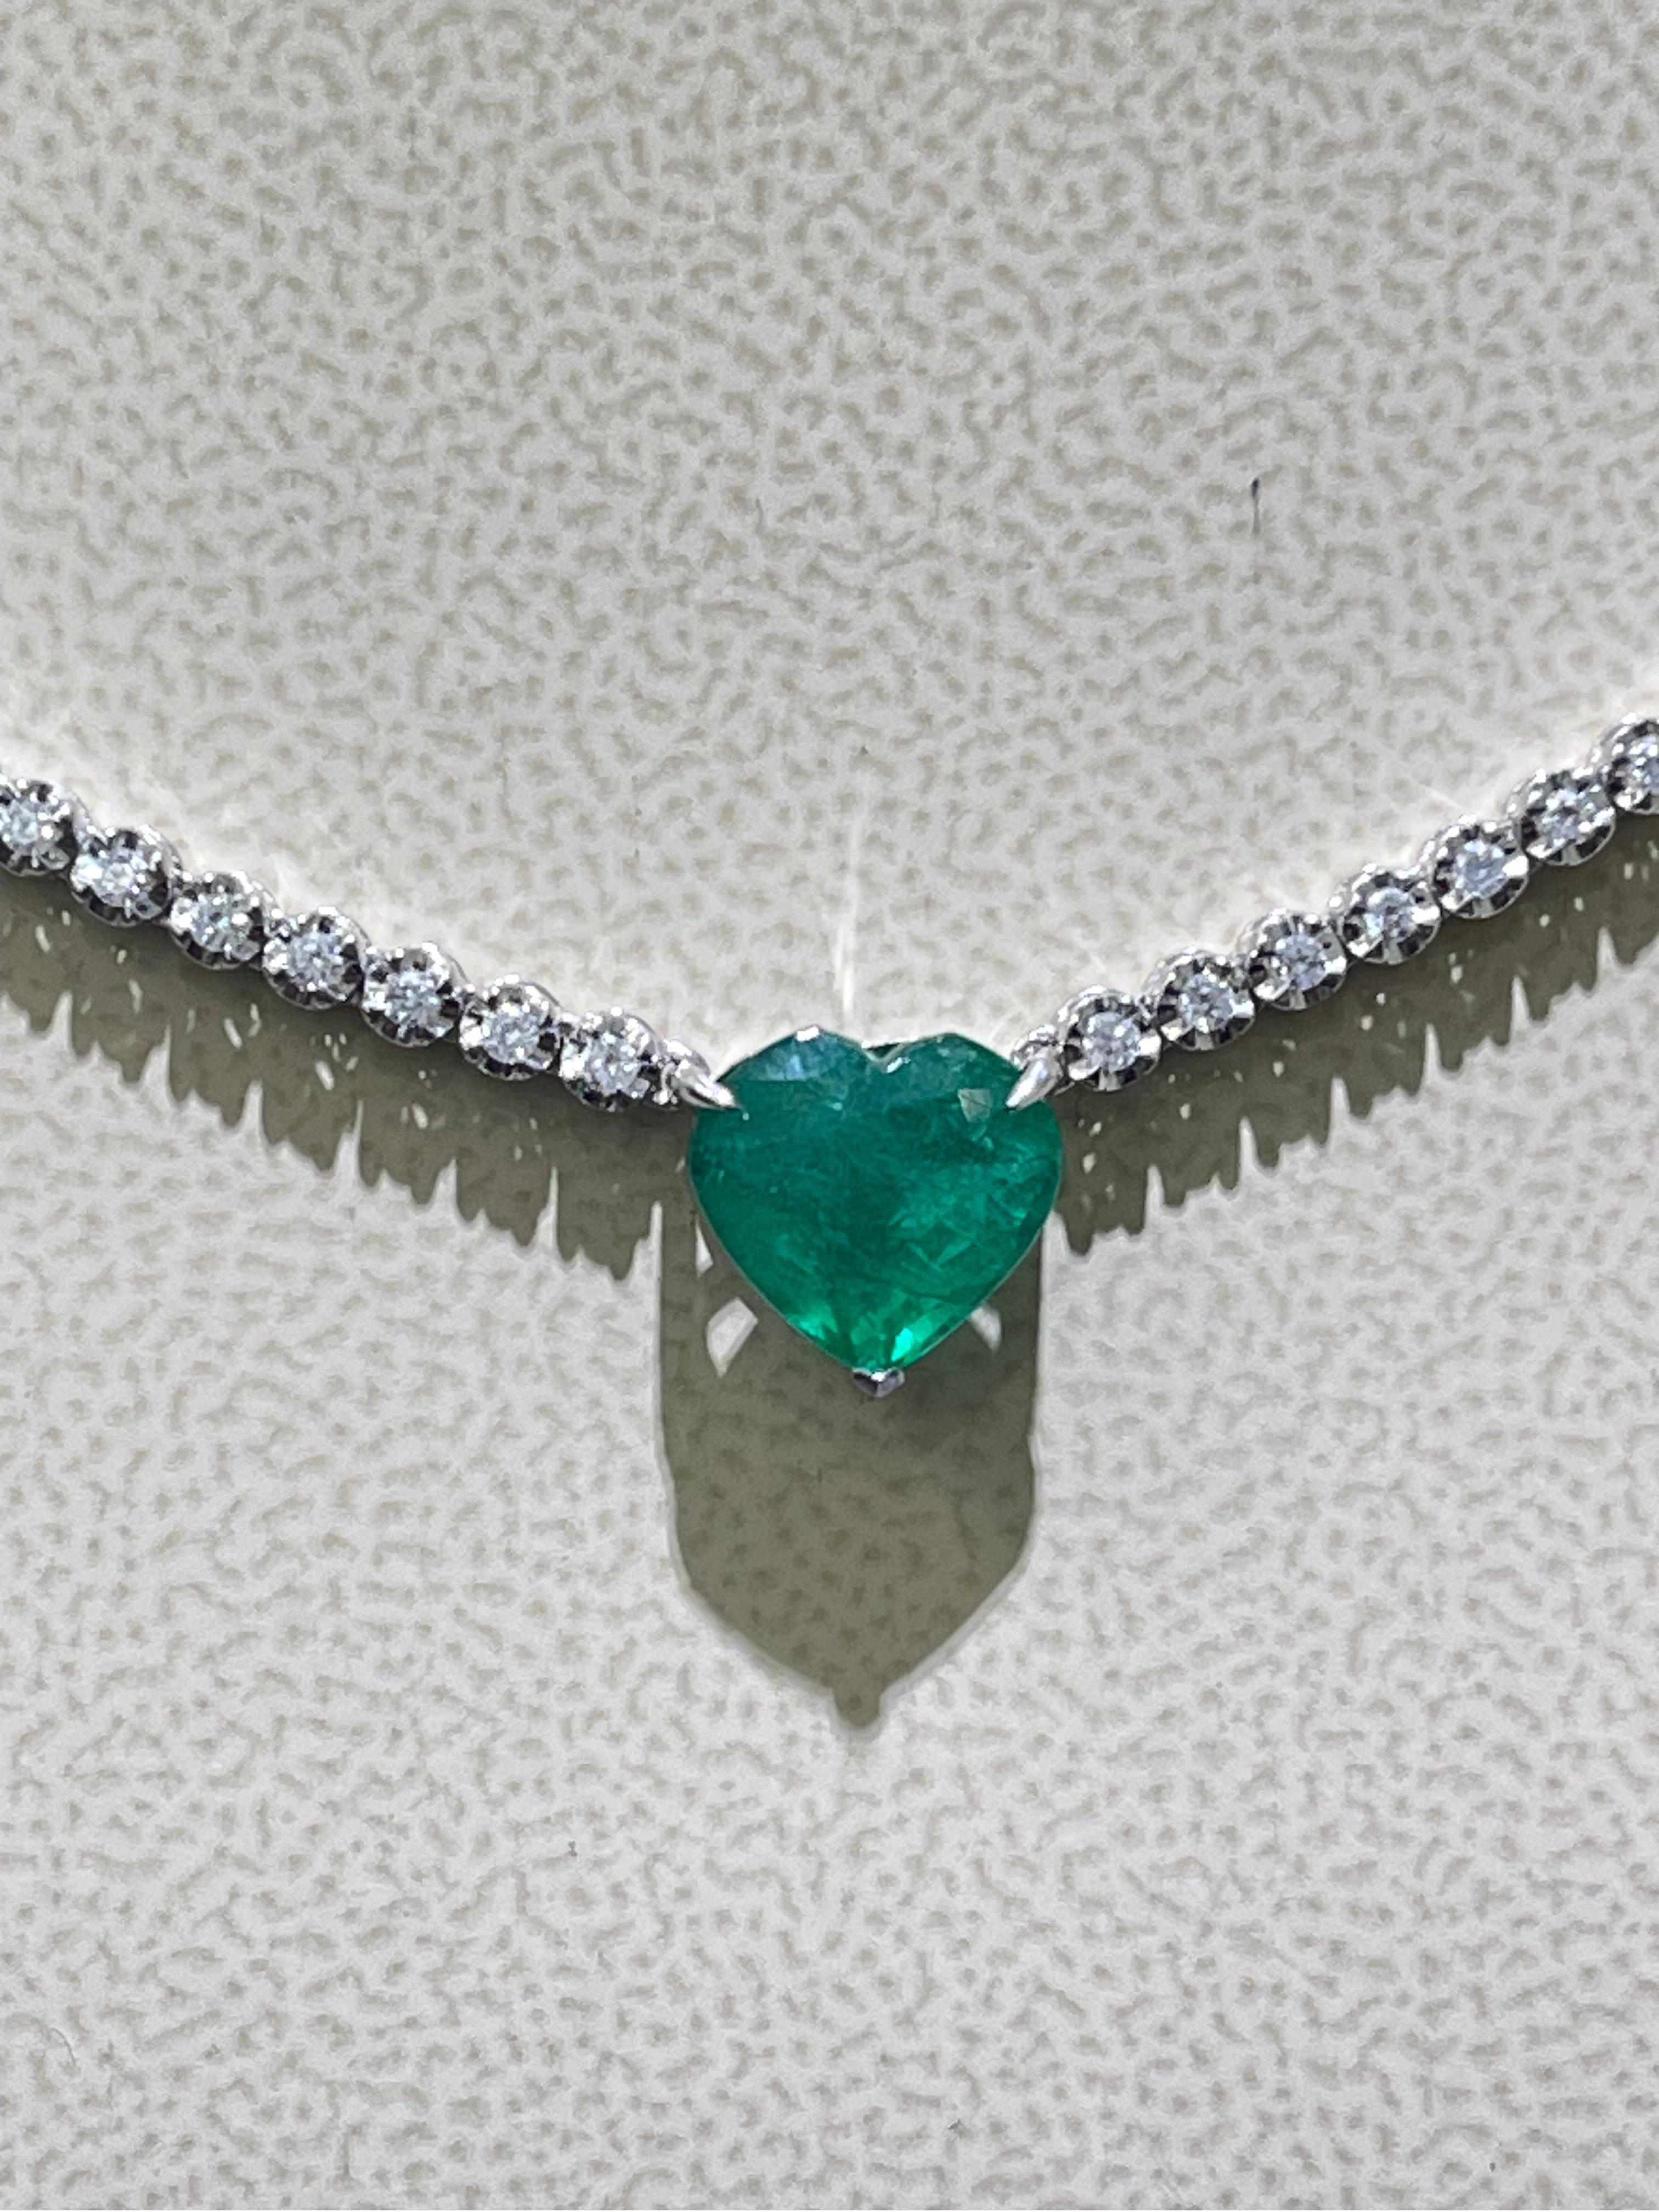 Gorgeous Emerald And Diamond Necklace In 18k White Gold .

- 2.08 diamonds total carat weight,

- 2.73 carats in heart shaped emerald,

- necklace length is 16”